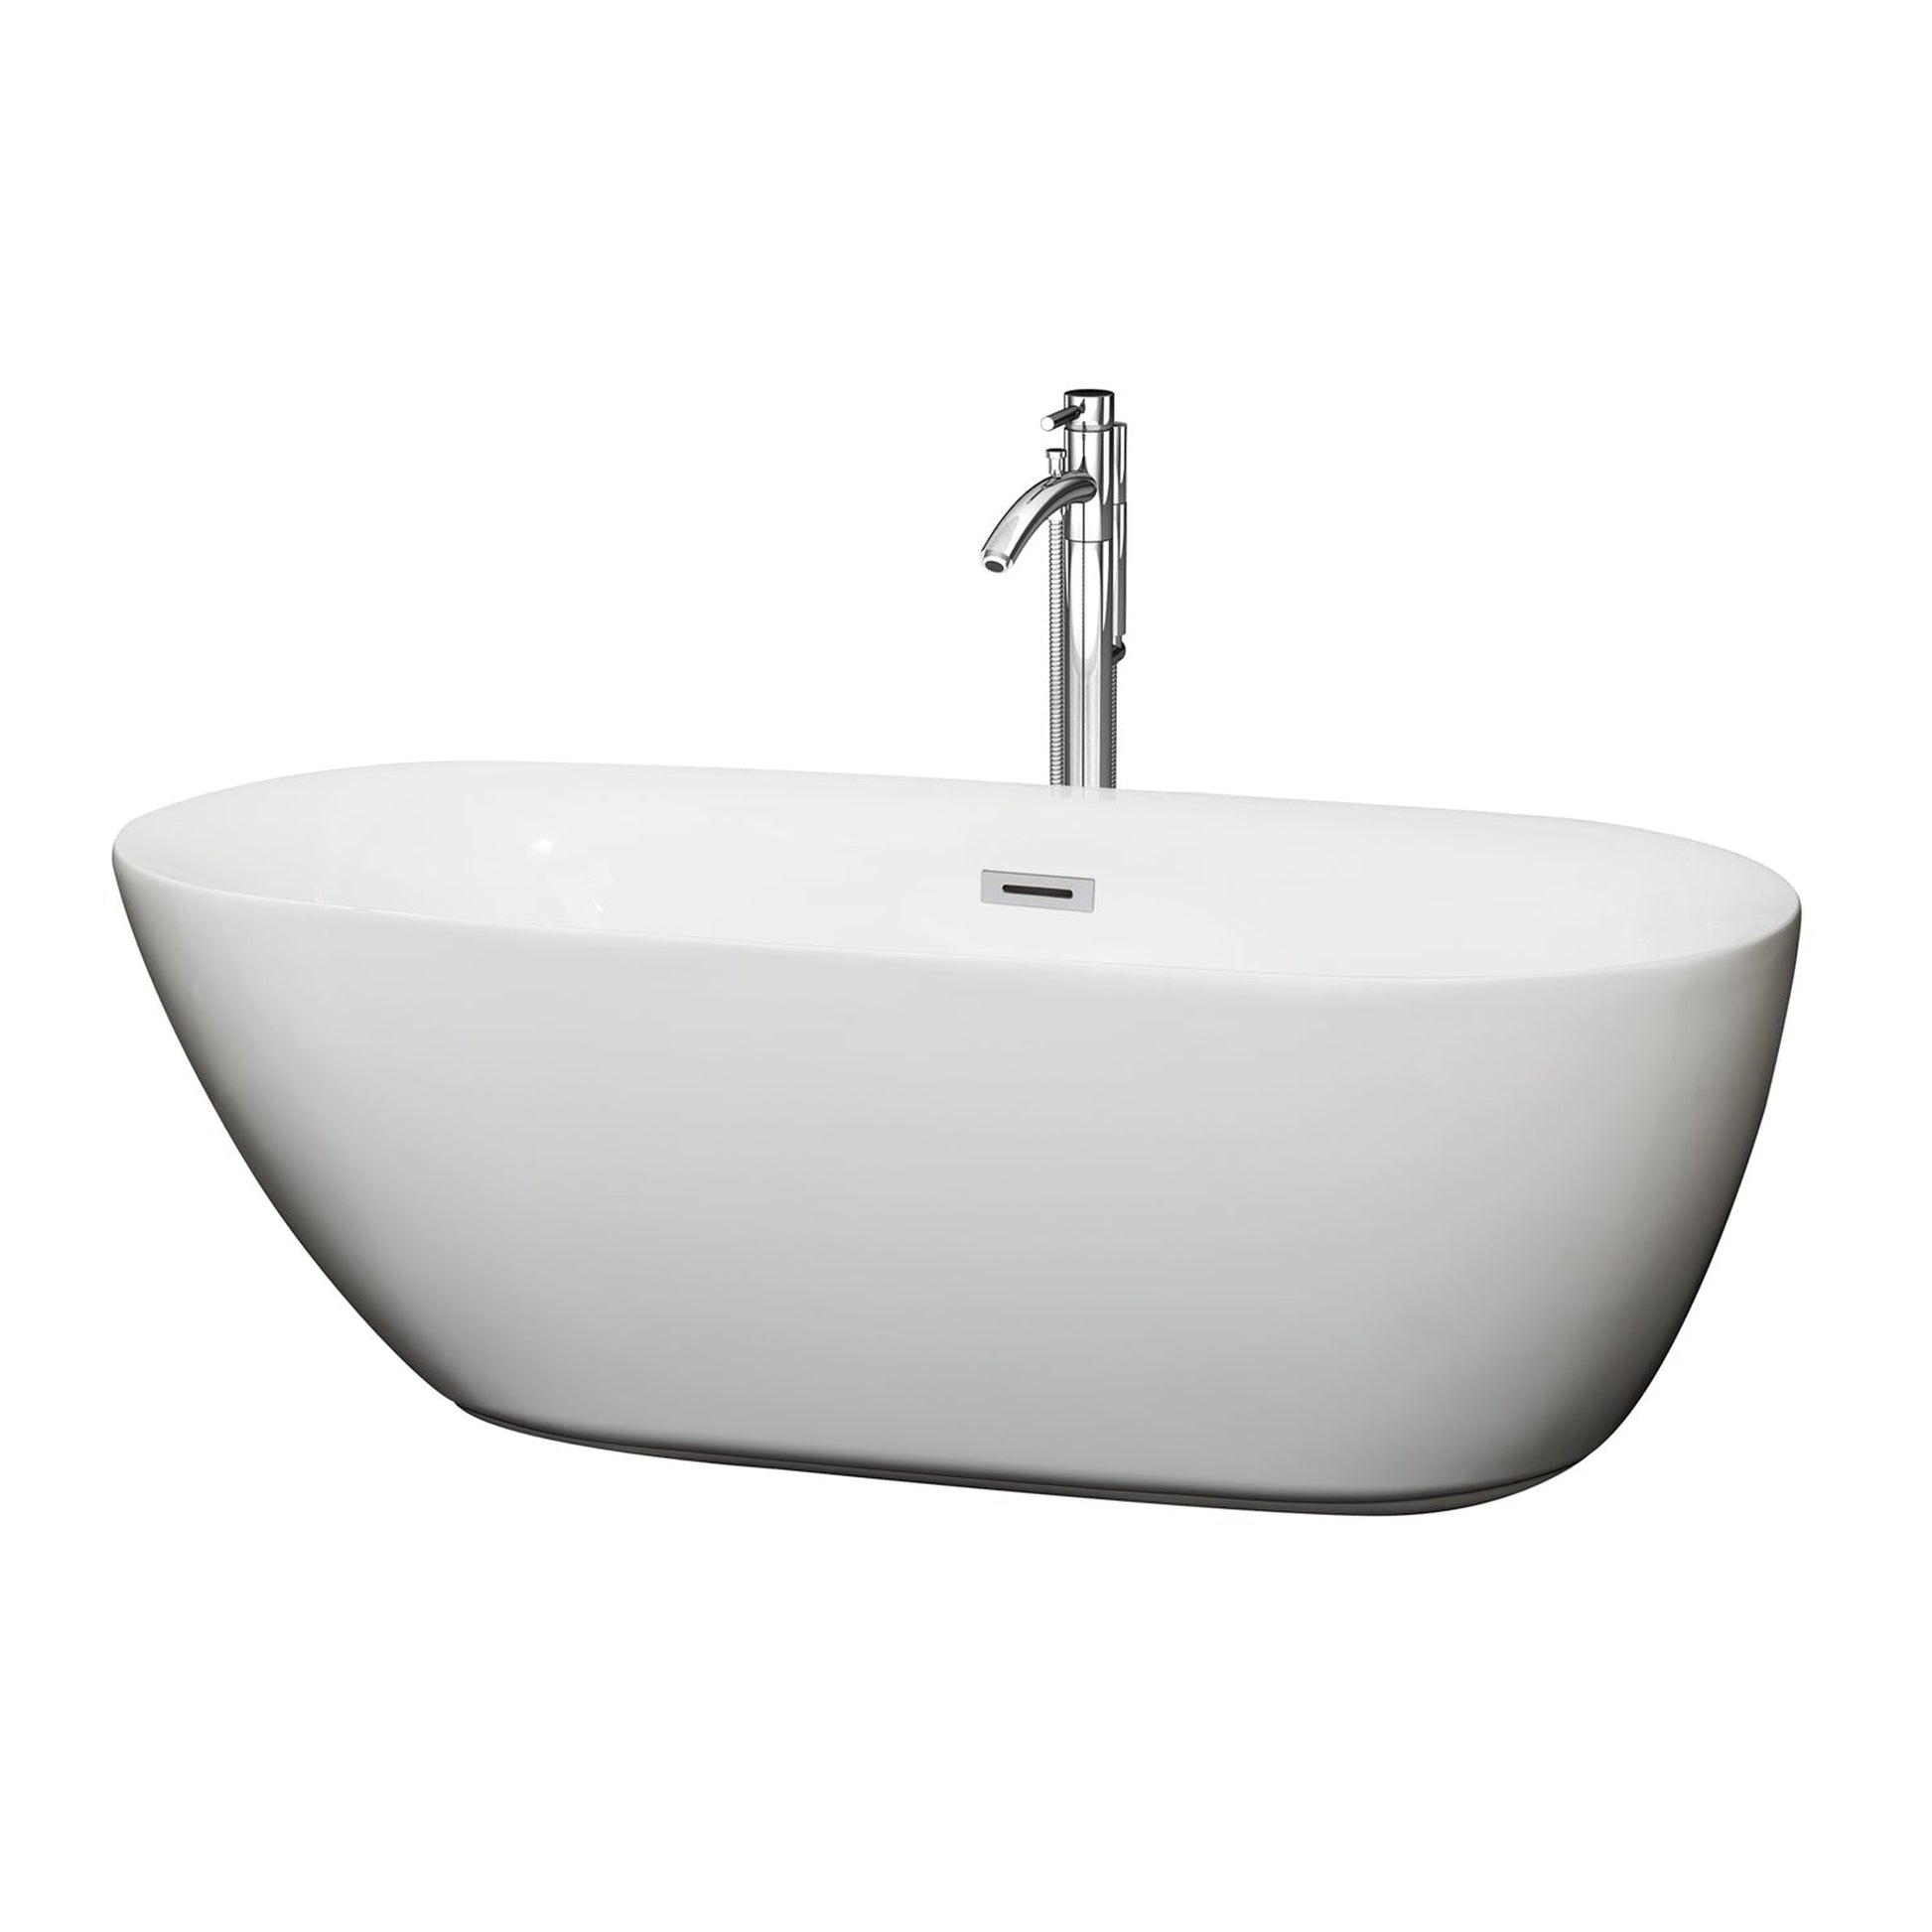 Wyndham Collection Melissa 65" Freestanding Bathtub in White With Floor Mounted Faucet, Drain and Overflow Trim in Polished Chrome